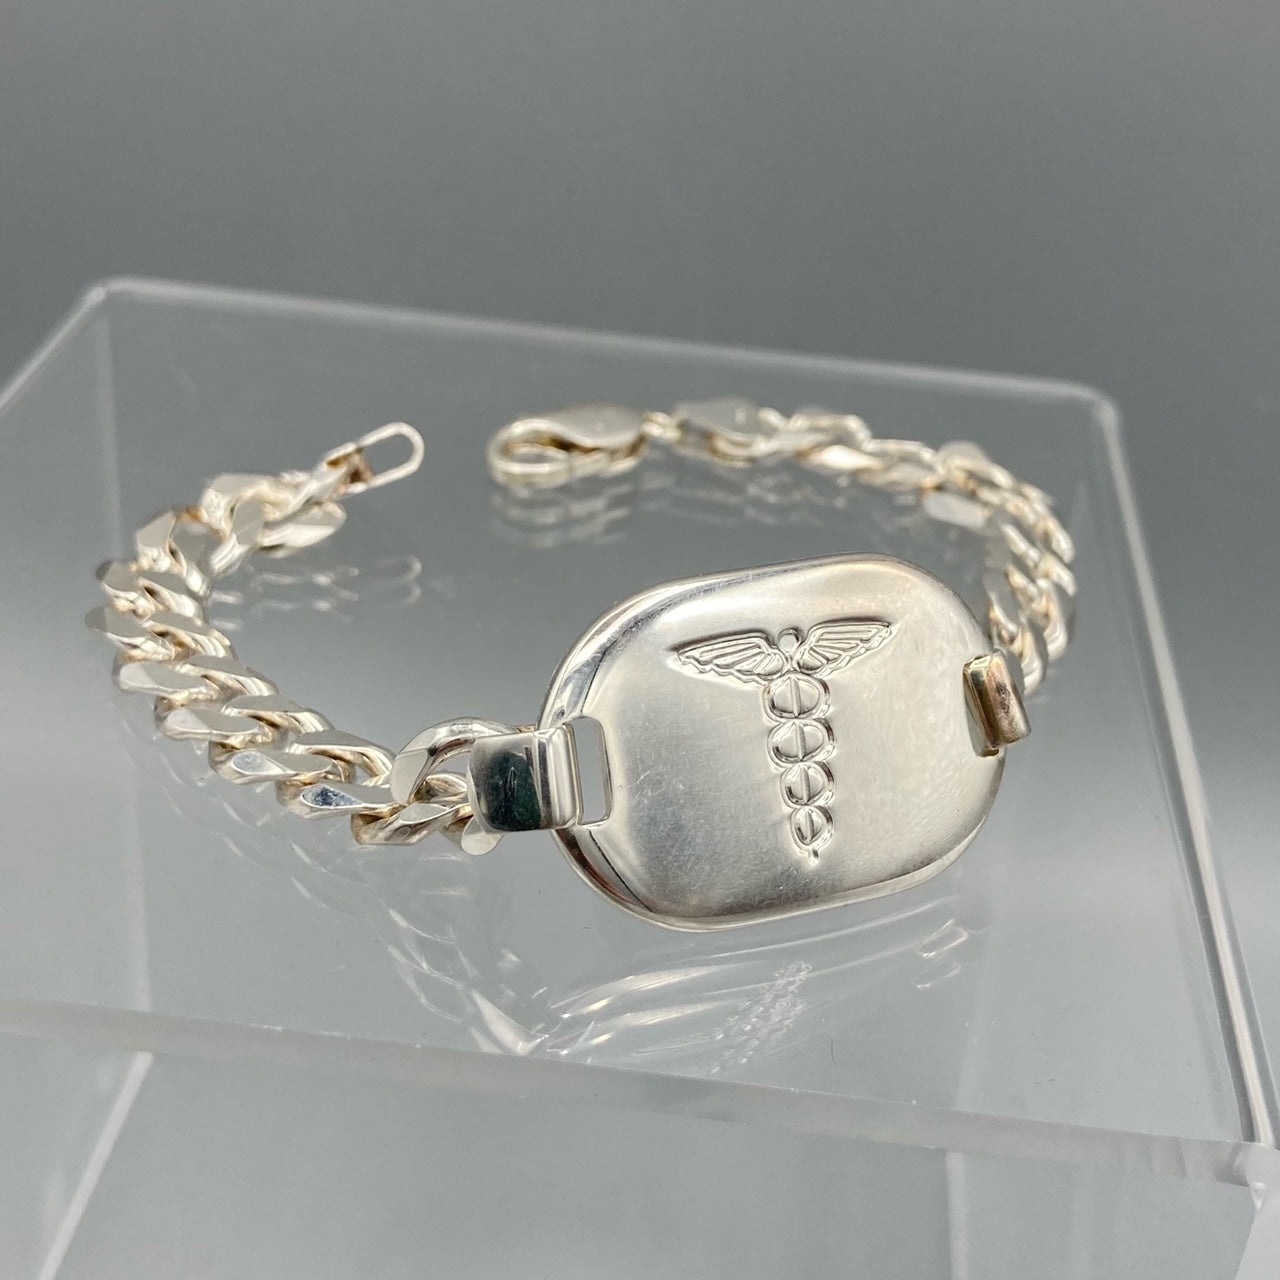 Solid Heavy Sterling Silver Medic Alert Bracelet with Custom Engraving Included